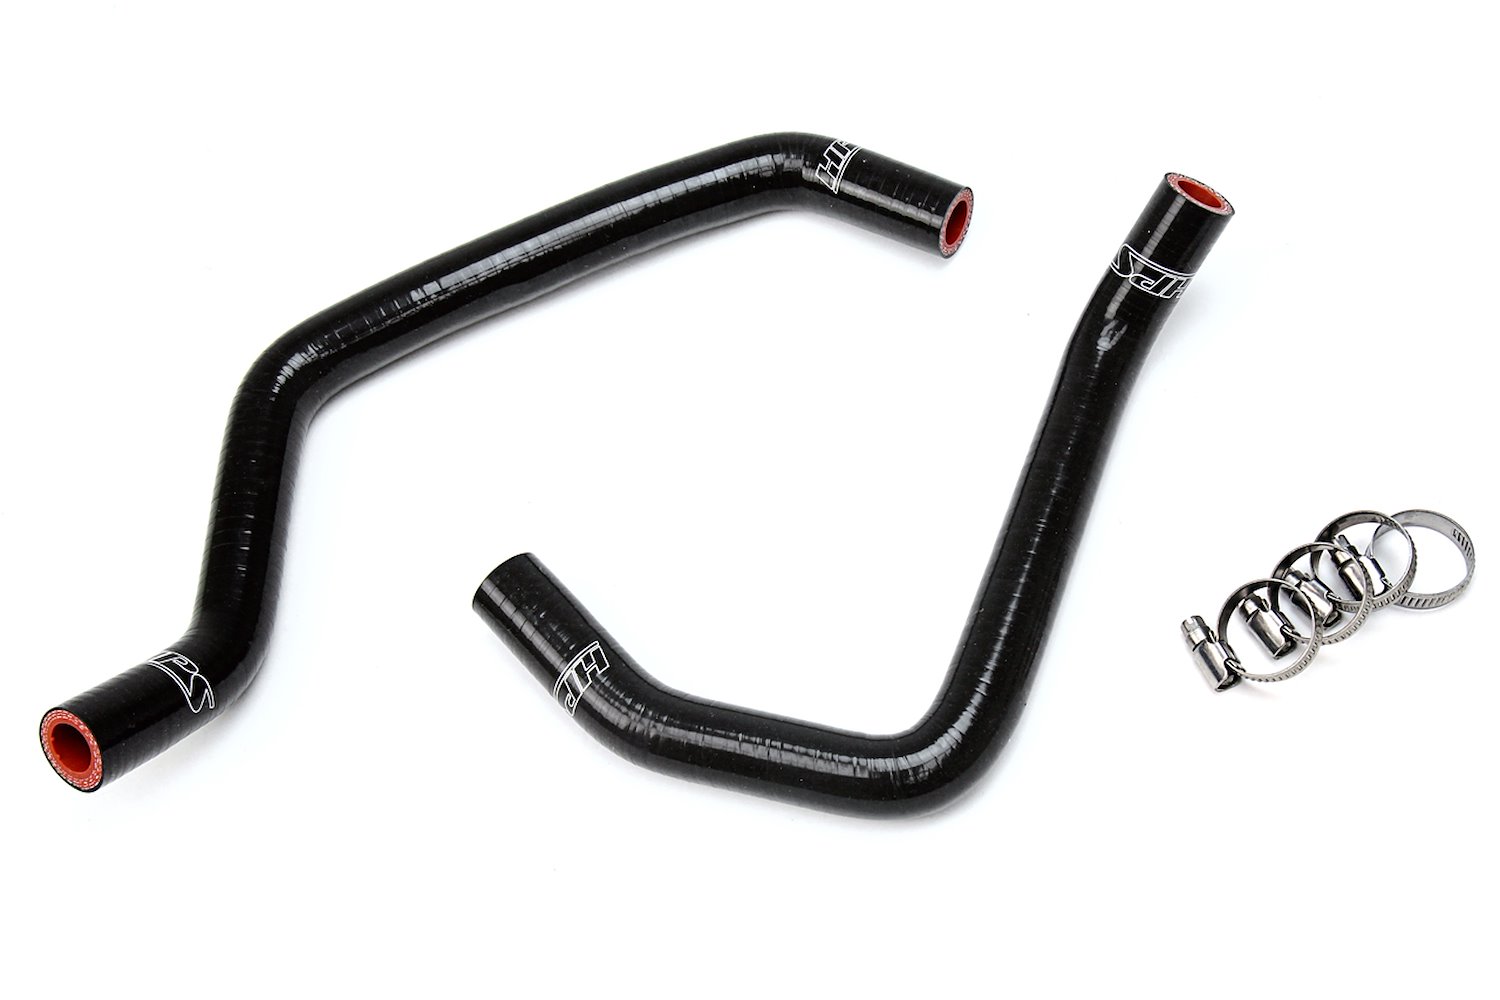 57-1702-BLK Heater Hose Kit, High-Temp 3-Ply Reinforced Silicone, Replace OEM Rubber Heater Coolant Hoses